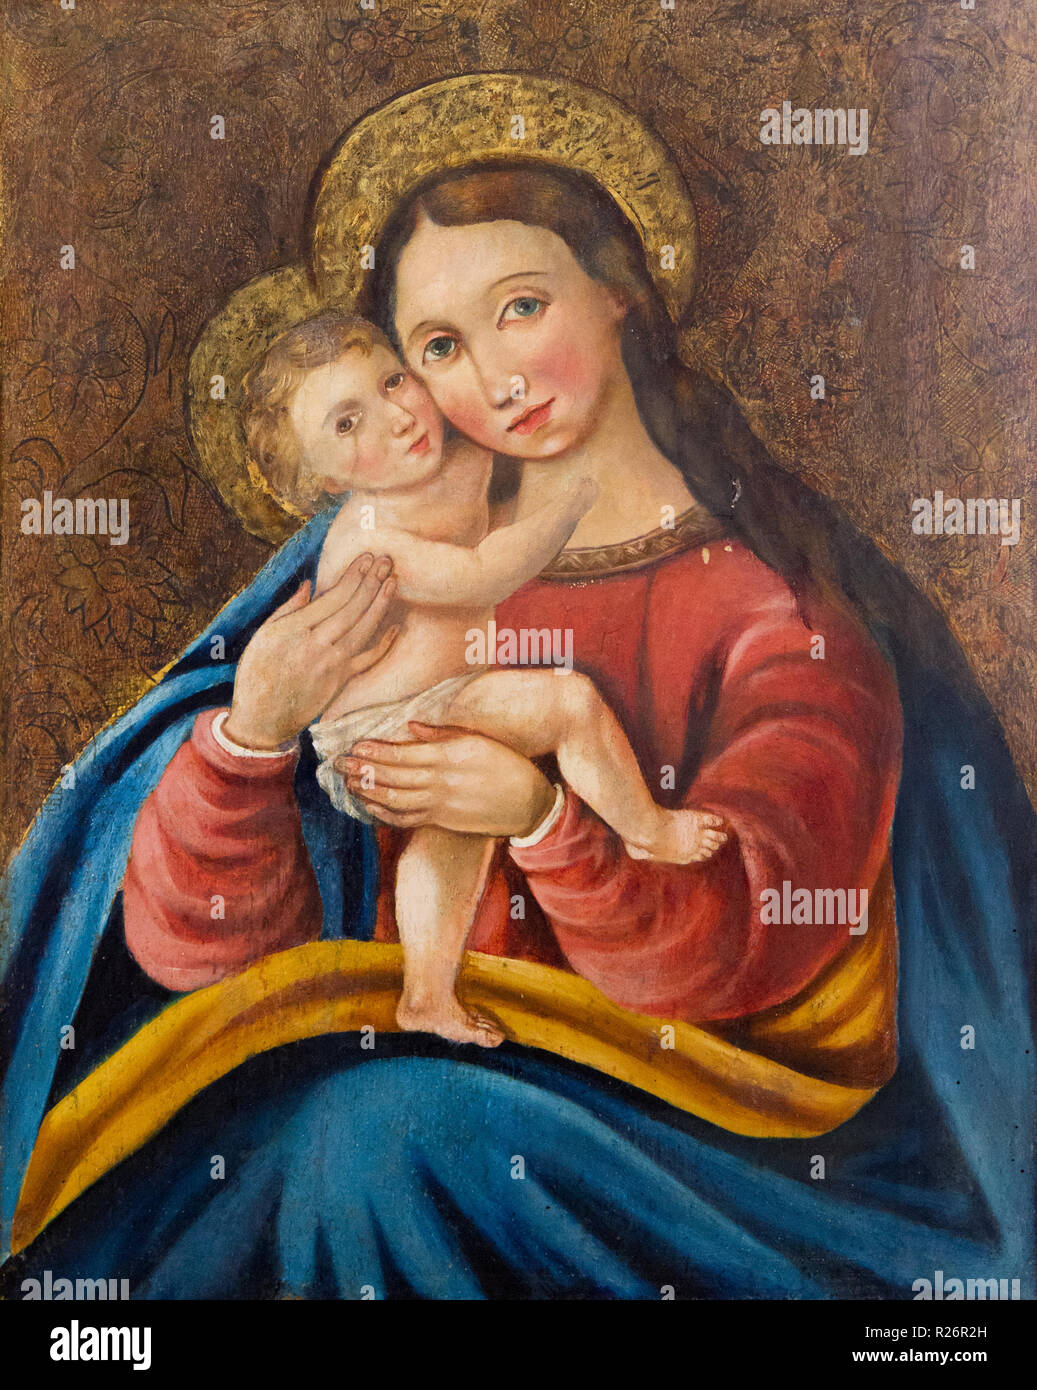 An icon of Virgin Eleusa (or Eleousa) (Greek: tenderness or showing mercy) - Virgin of Tenderness from a church in Bardejov. Author: Mojs Zomph, 1860. Stock Photo